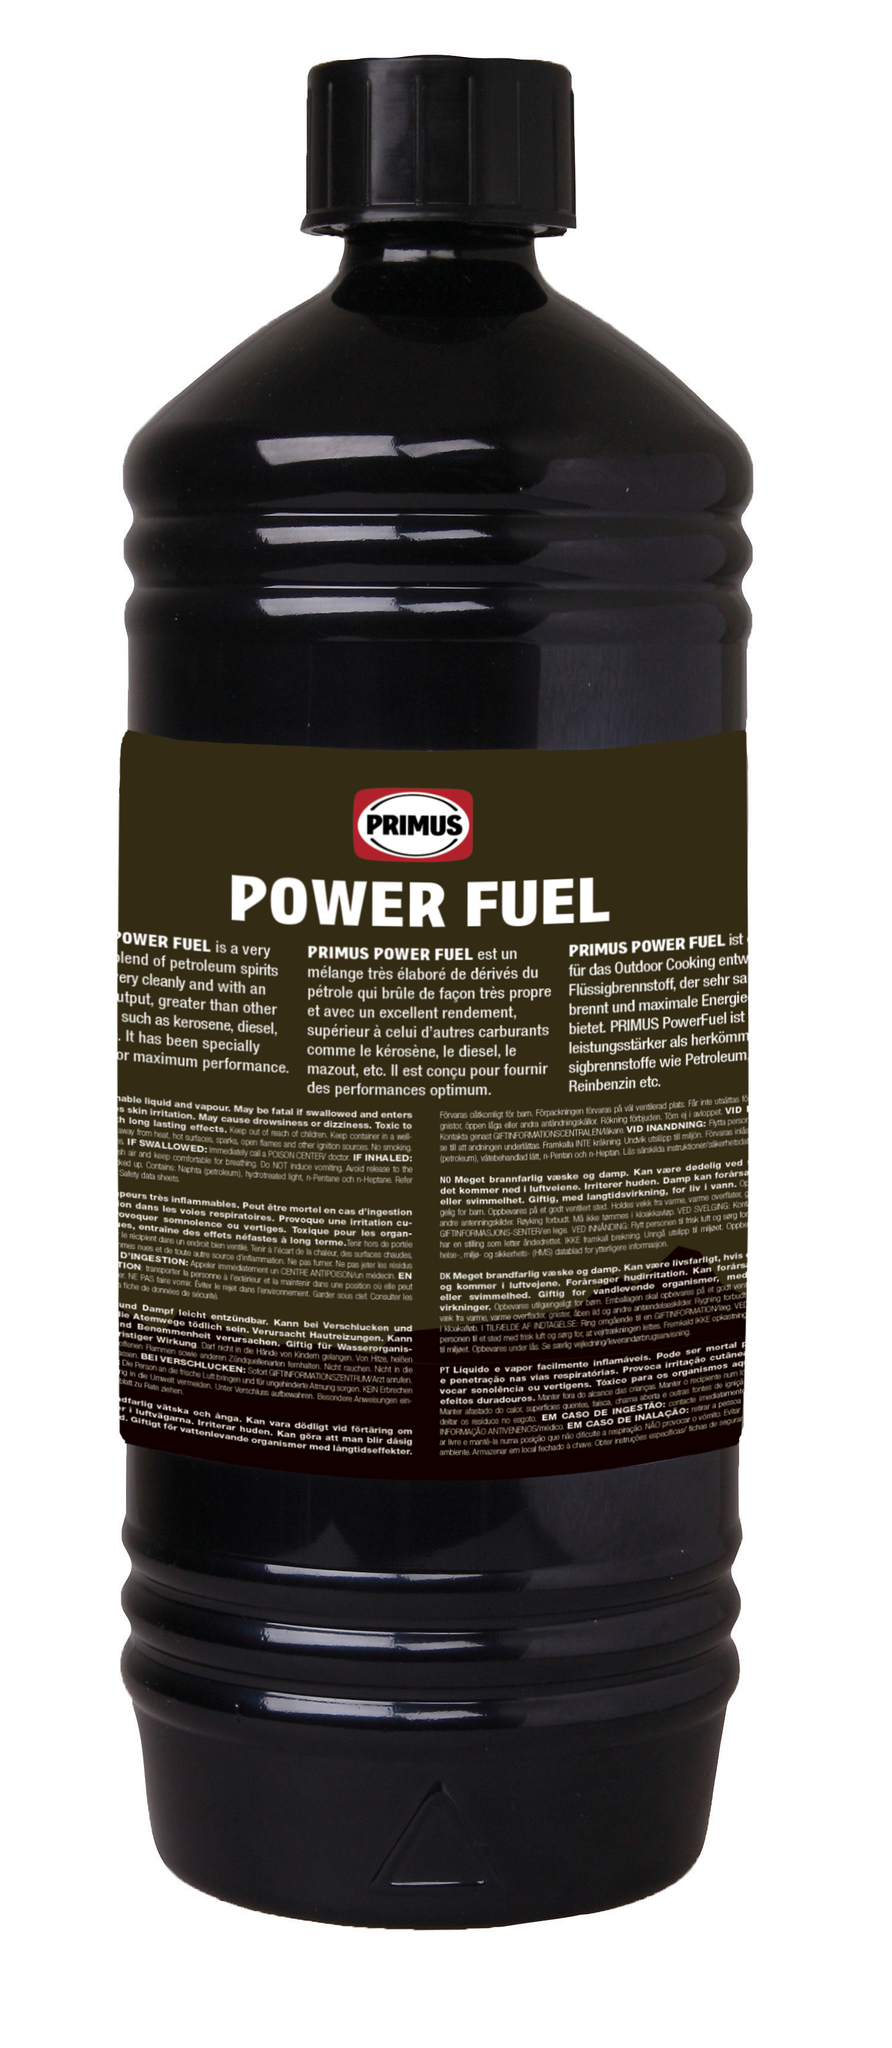 Primus Power Fuel Chemically Clean Gasoline